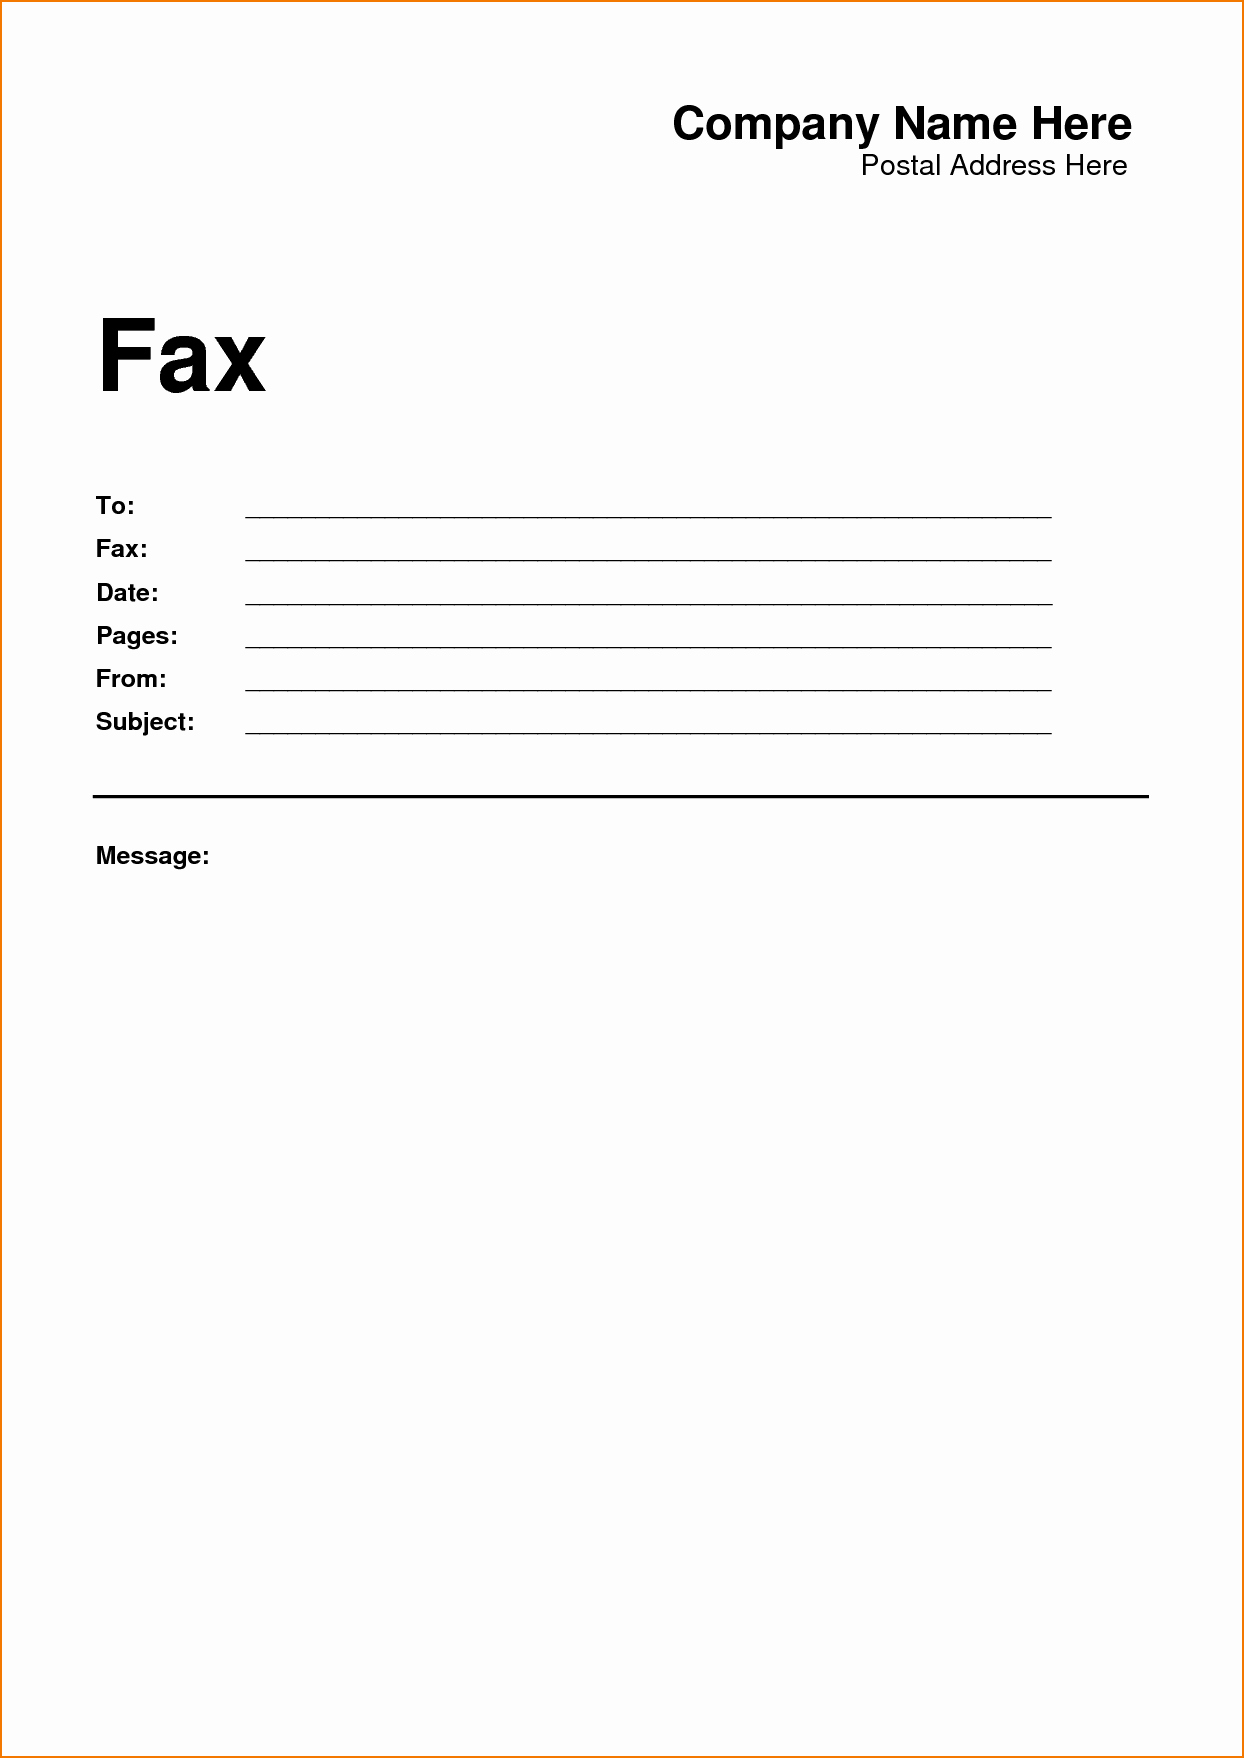 Free Fax Cover Sheets Templates Fresh 4 Printable Fax Cover Sheet Template